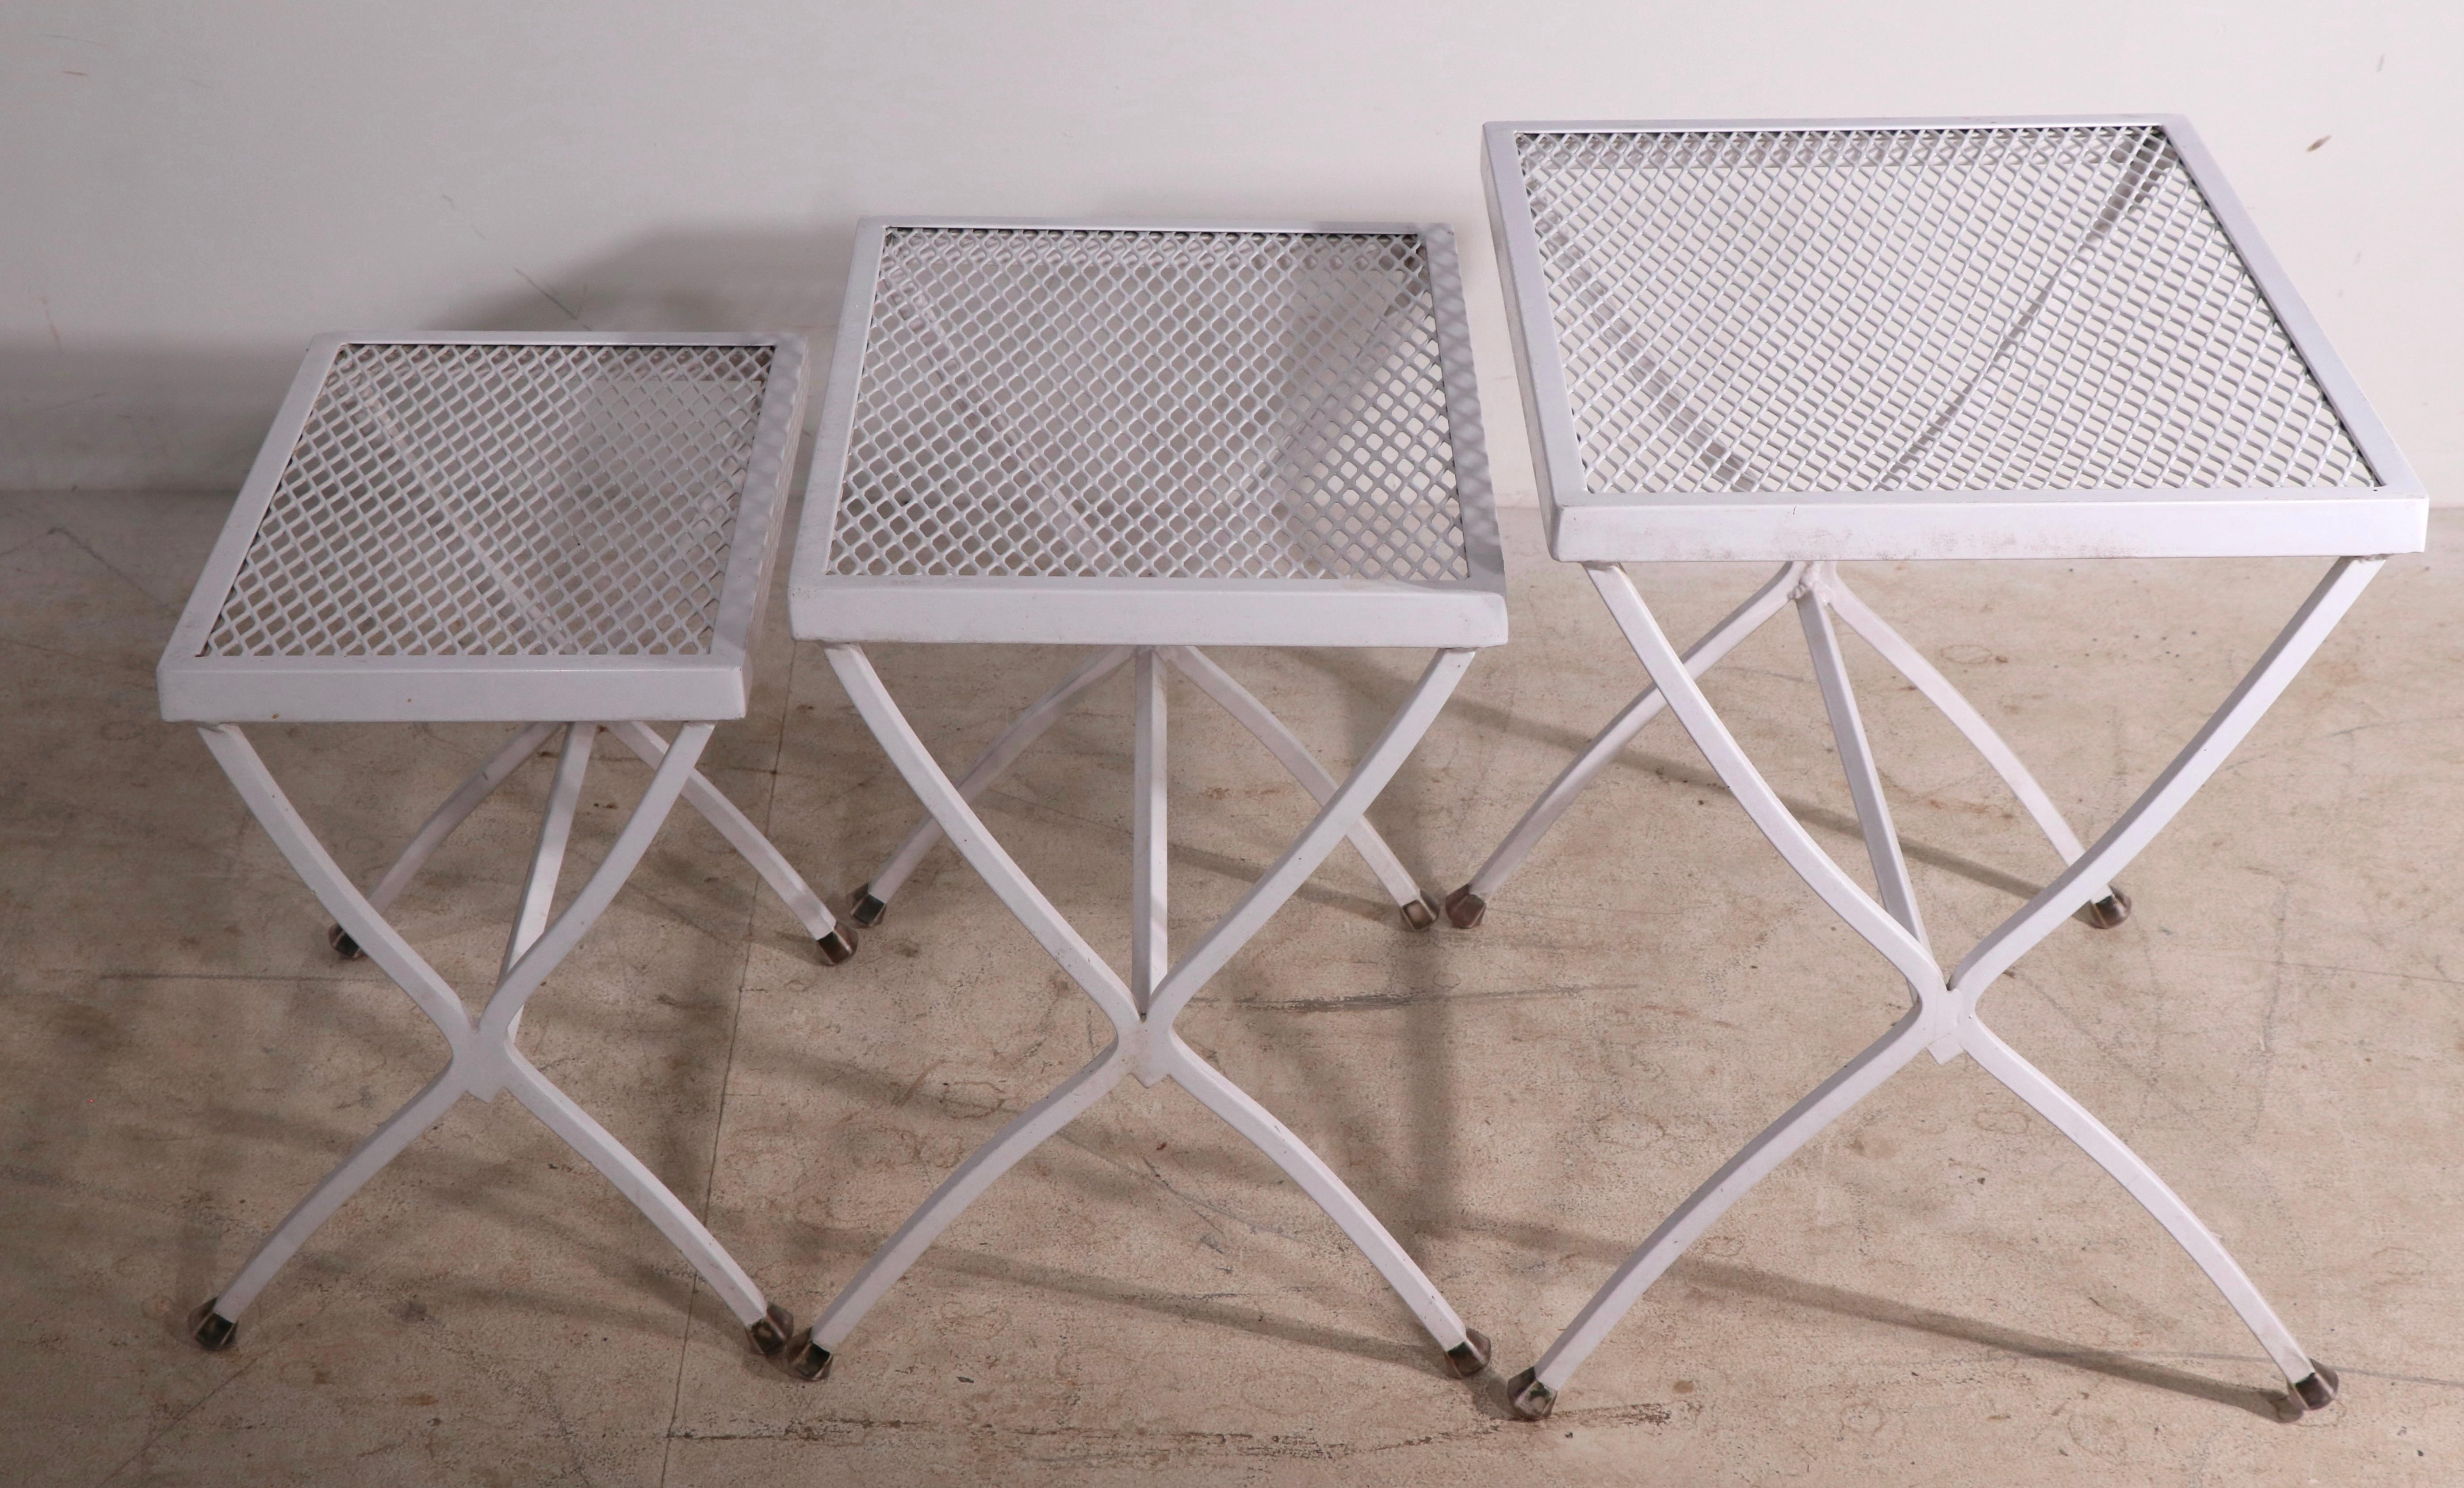 Chic architectural set of three nesting tables of wrought iron and metal mesh. The three tables are graduated in size, all are in very good, clean, original and ready to use condition. Usable as is, we also offer custom powder coating if you prefer